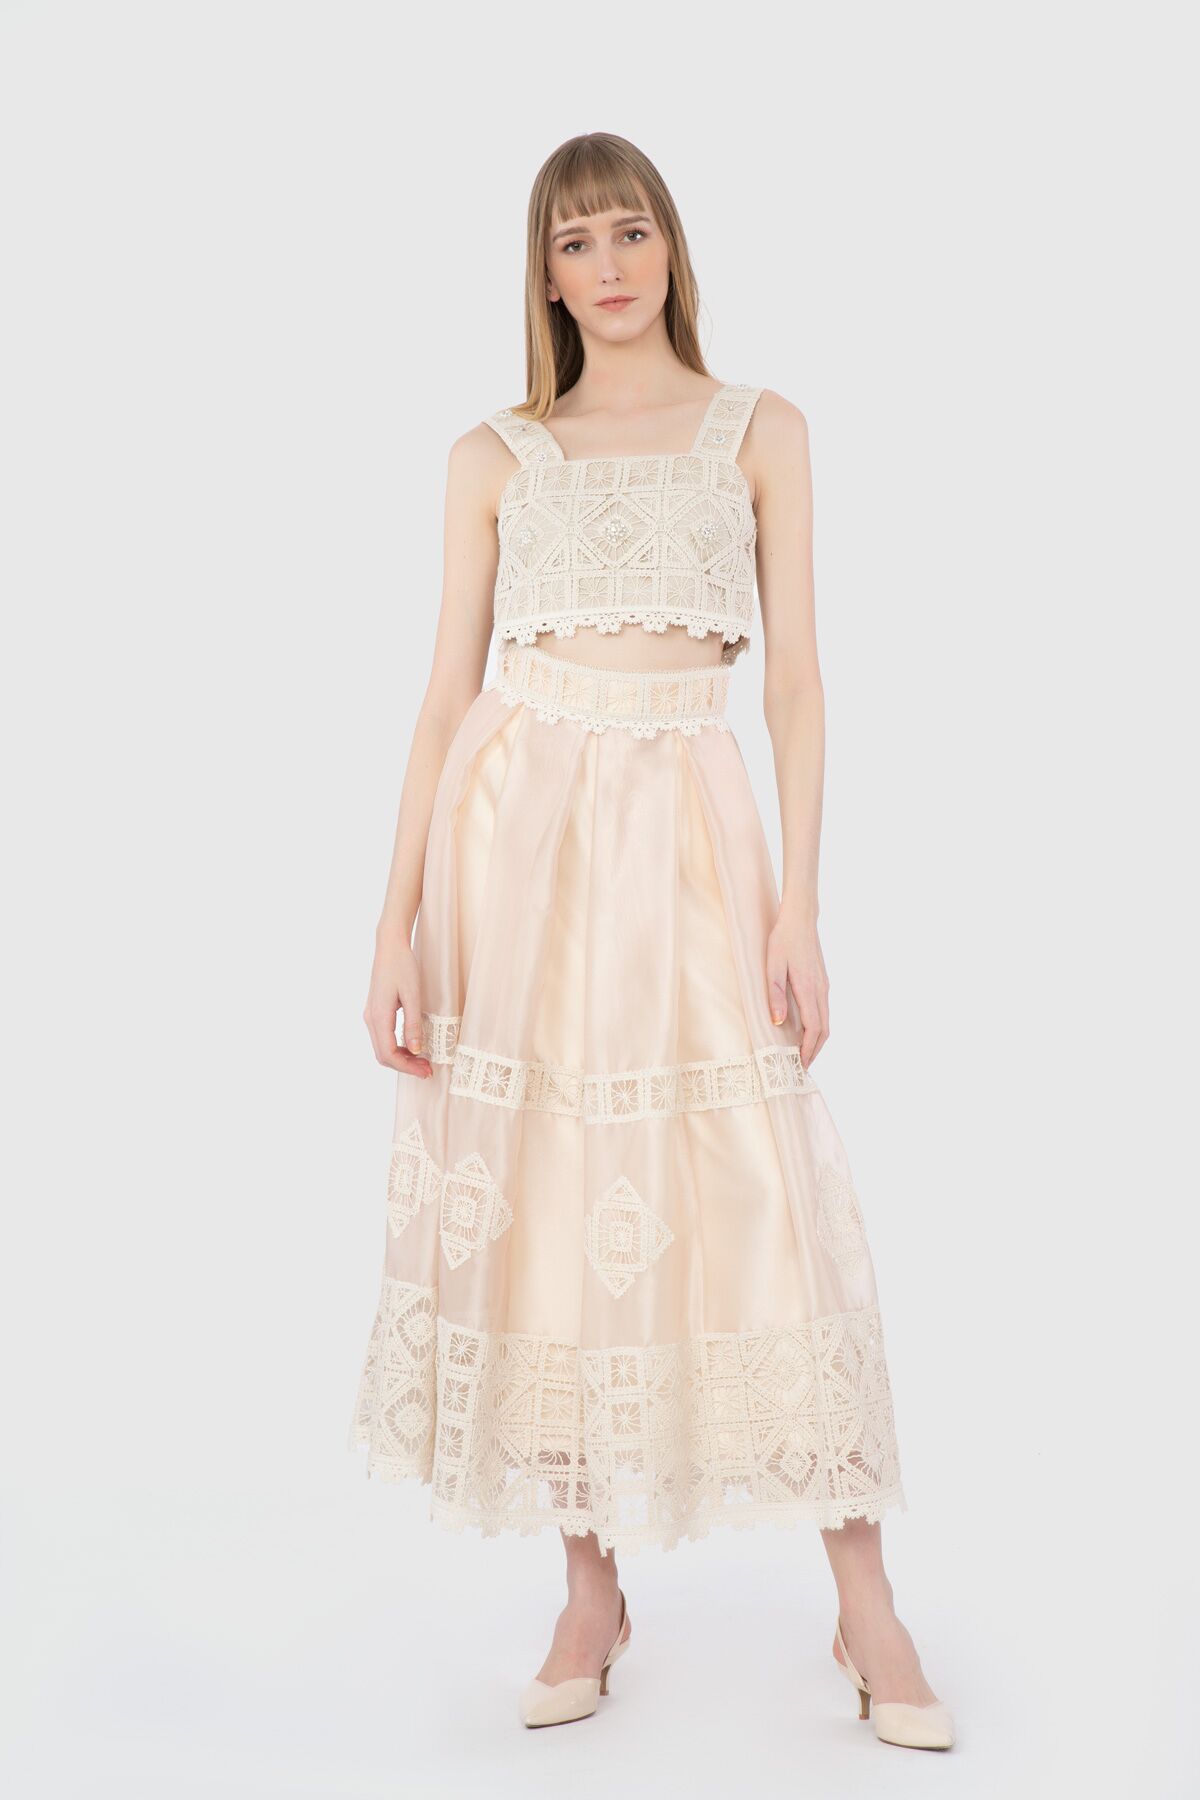  GIZIA - With Sliver Lace And Applique Detail Long Salmon Organza Skirt